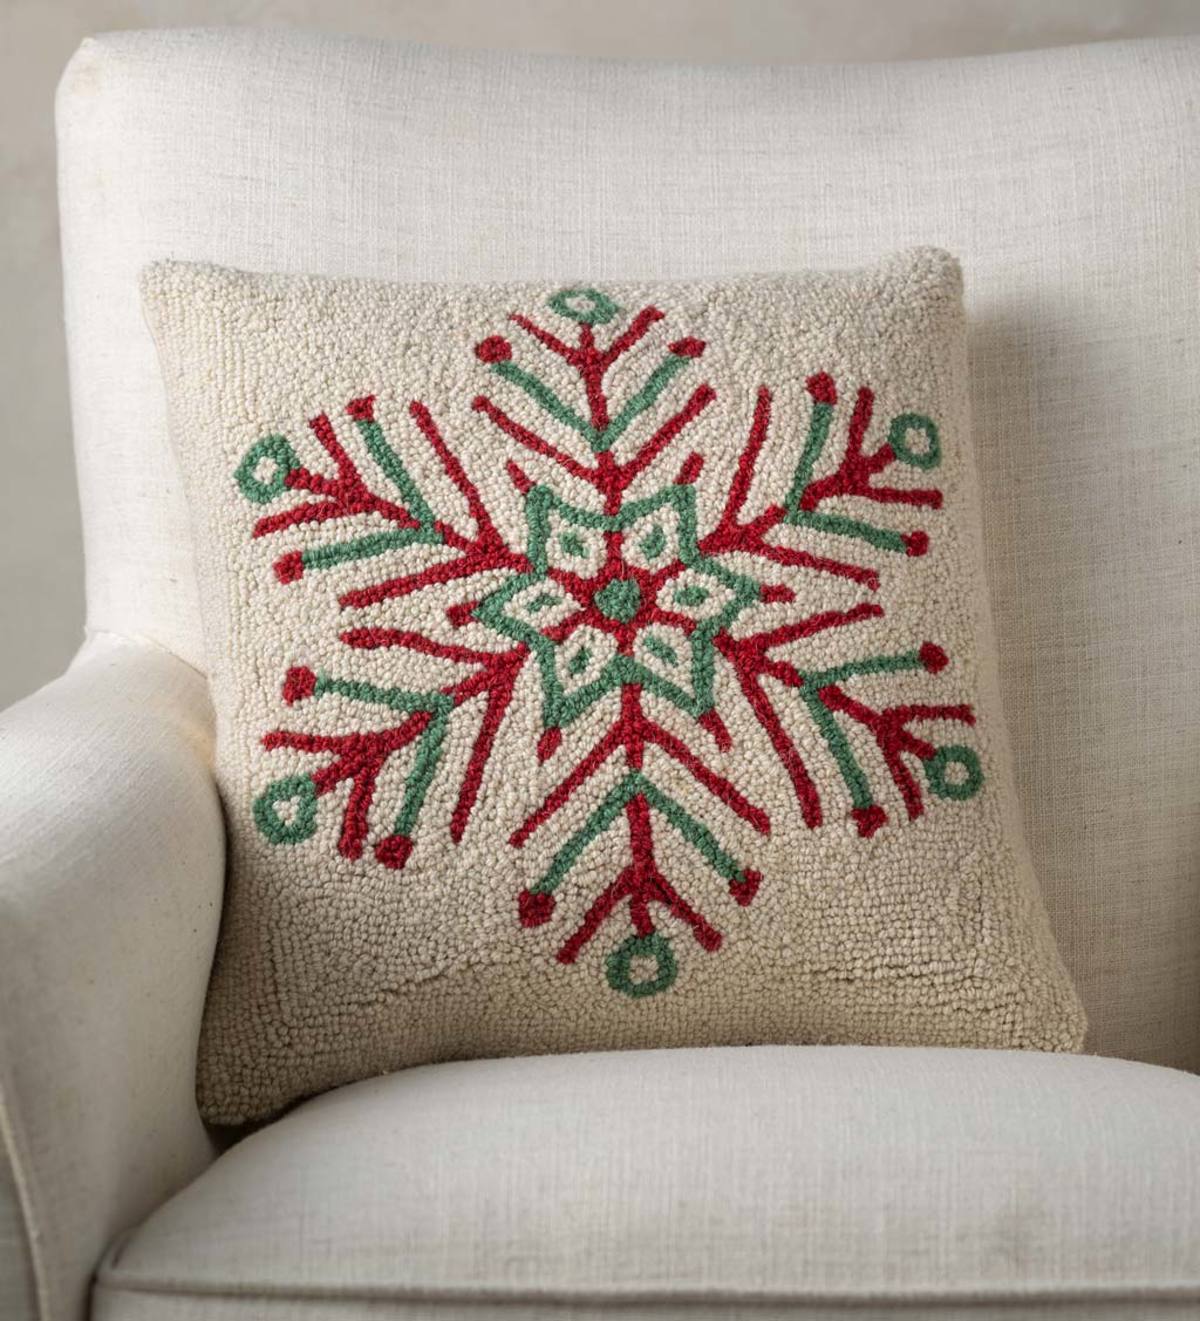 Snowflake Hand-Hooked Pillow, 16"Sq.